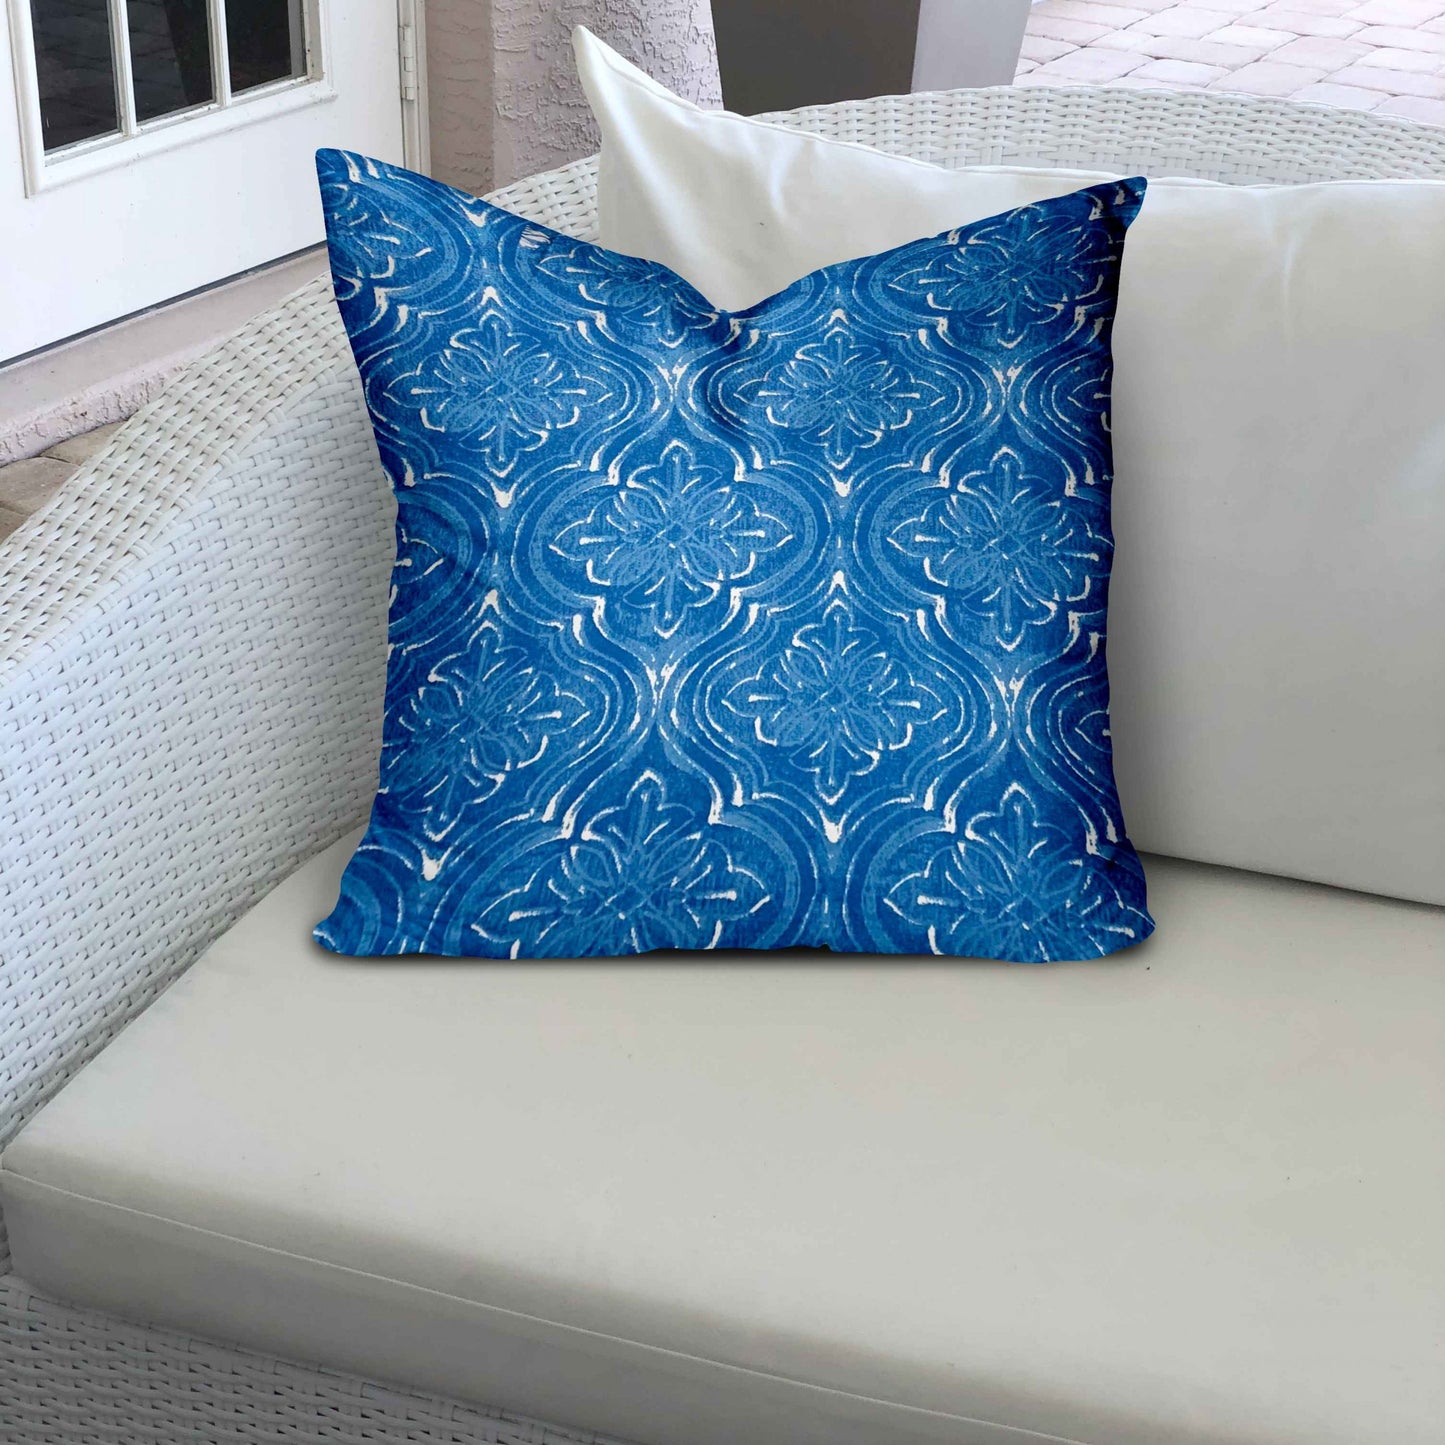 18" X 18" Blue And White Zippered Ikat Throw Indoor Outdoor Pillow